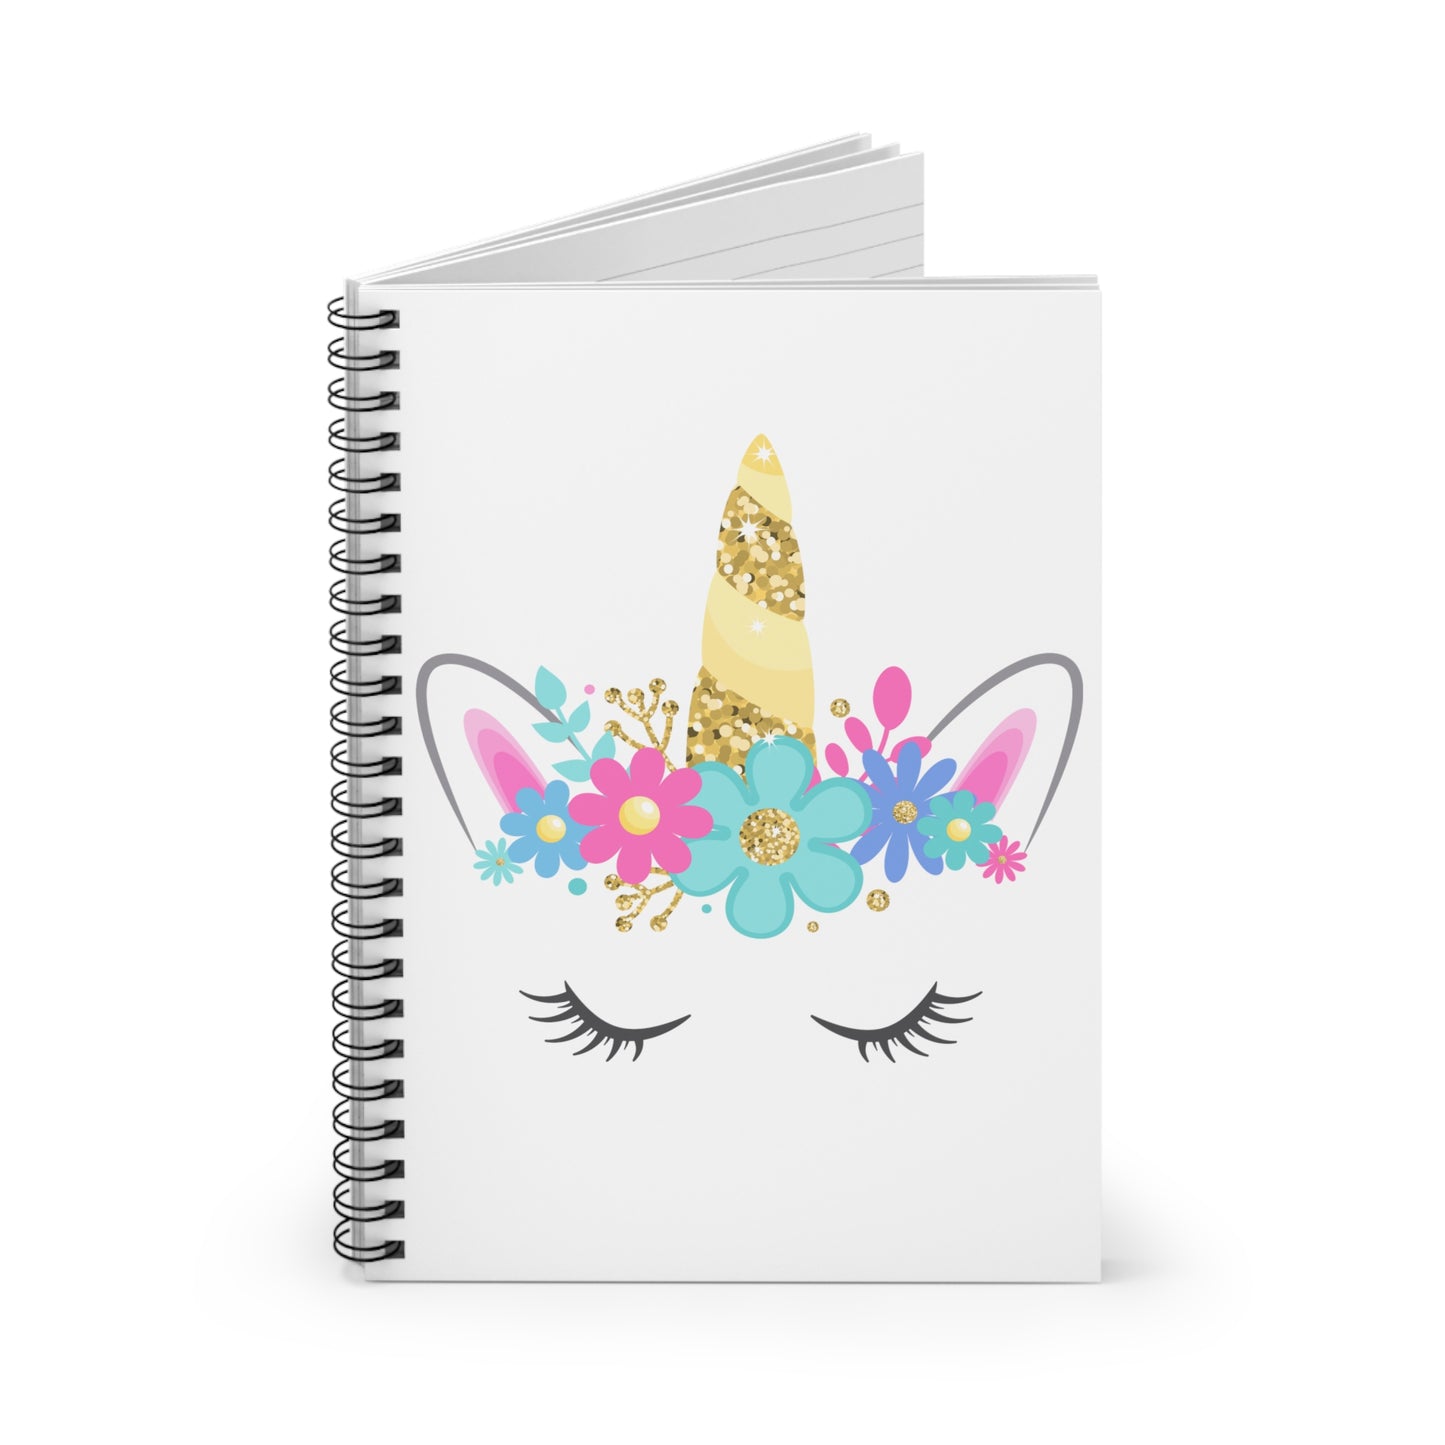 Mythical Unicorn Face: Spiral Notebook - Log Books - Journals - Diaries - and More Custom Printed by TheGlassyLass.com